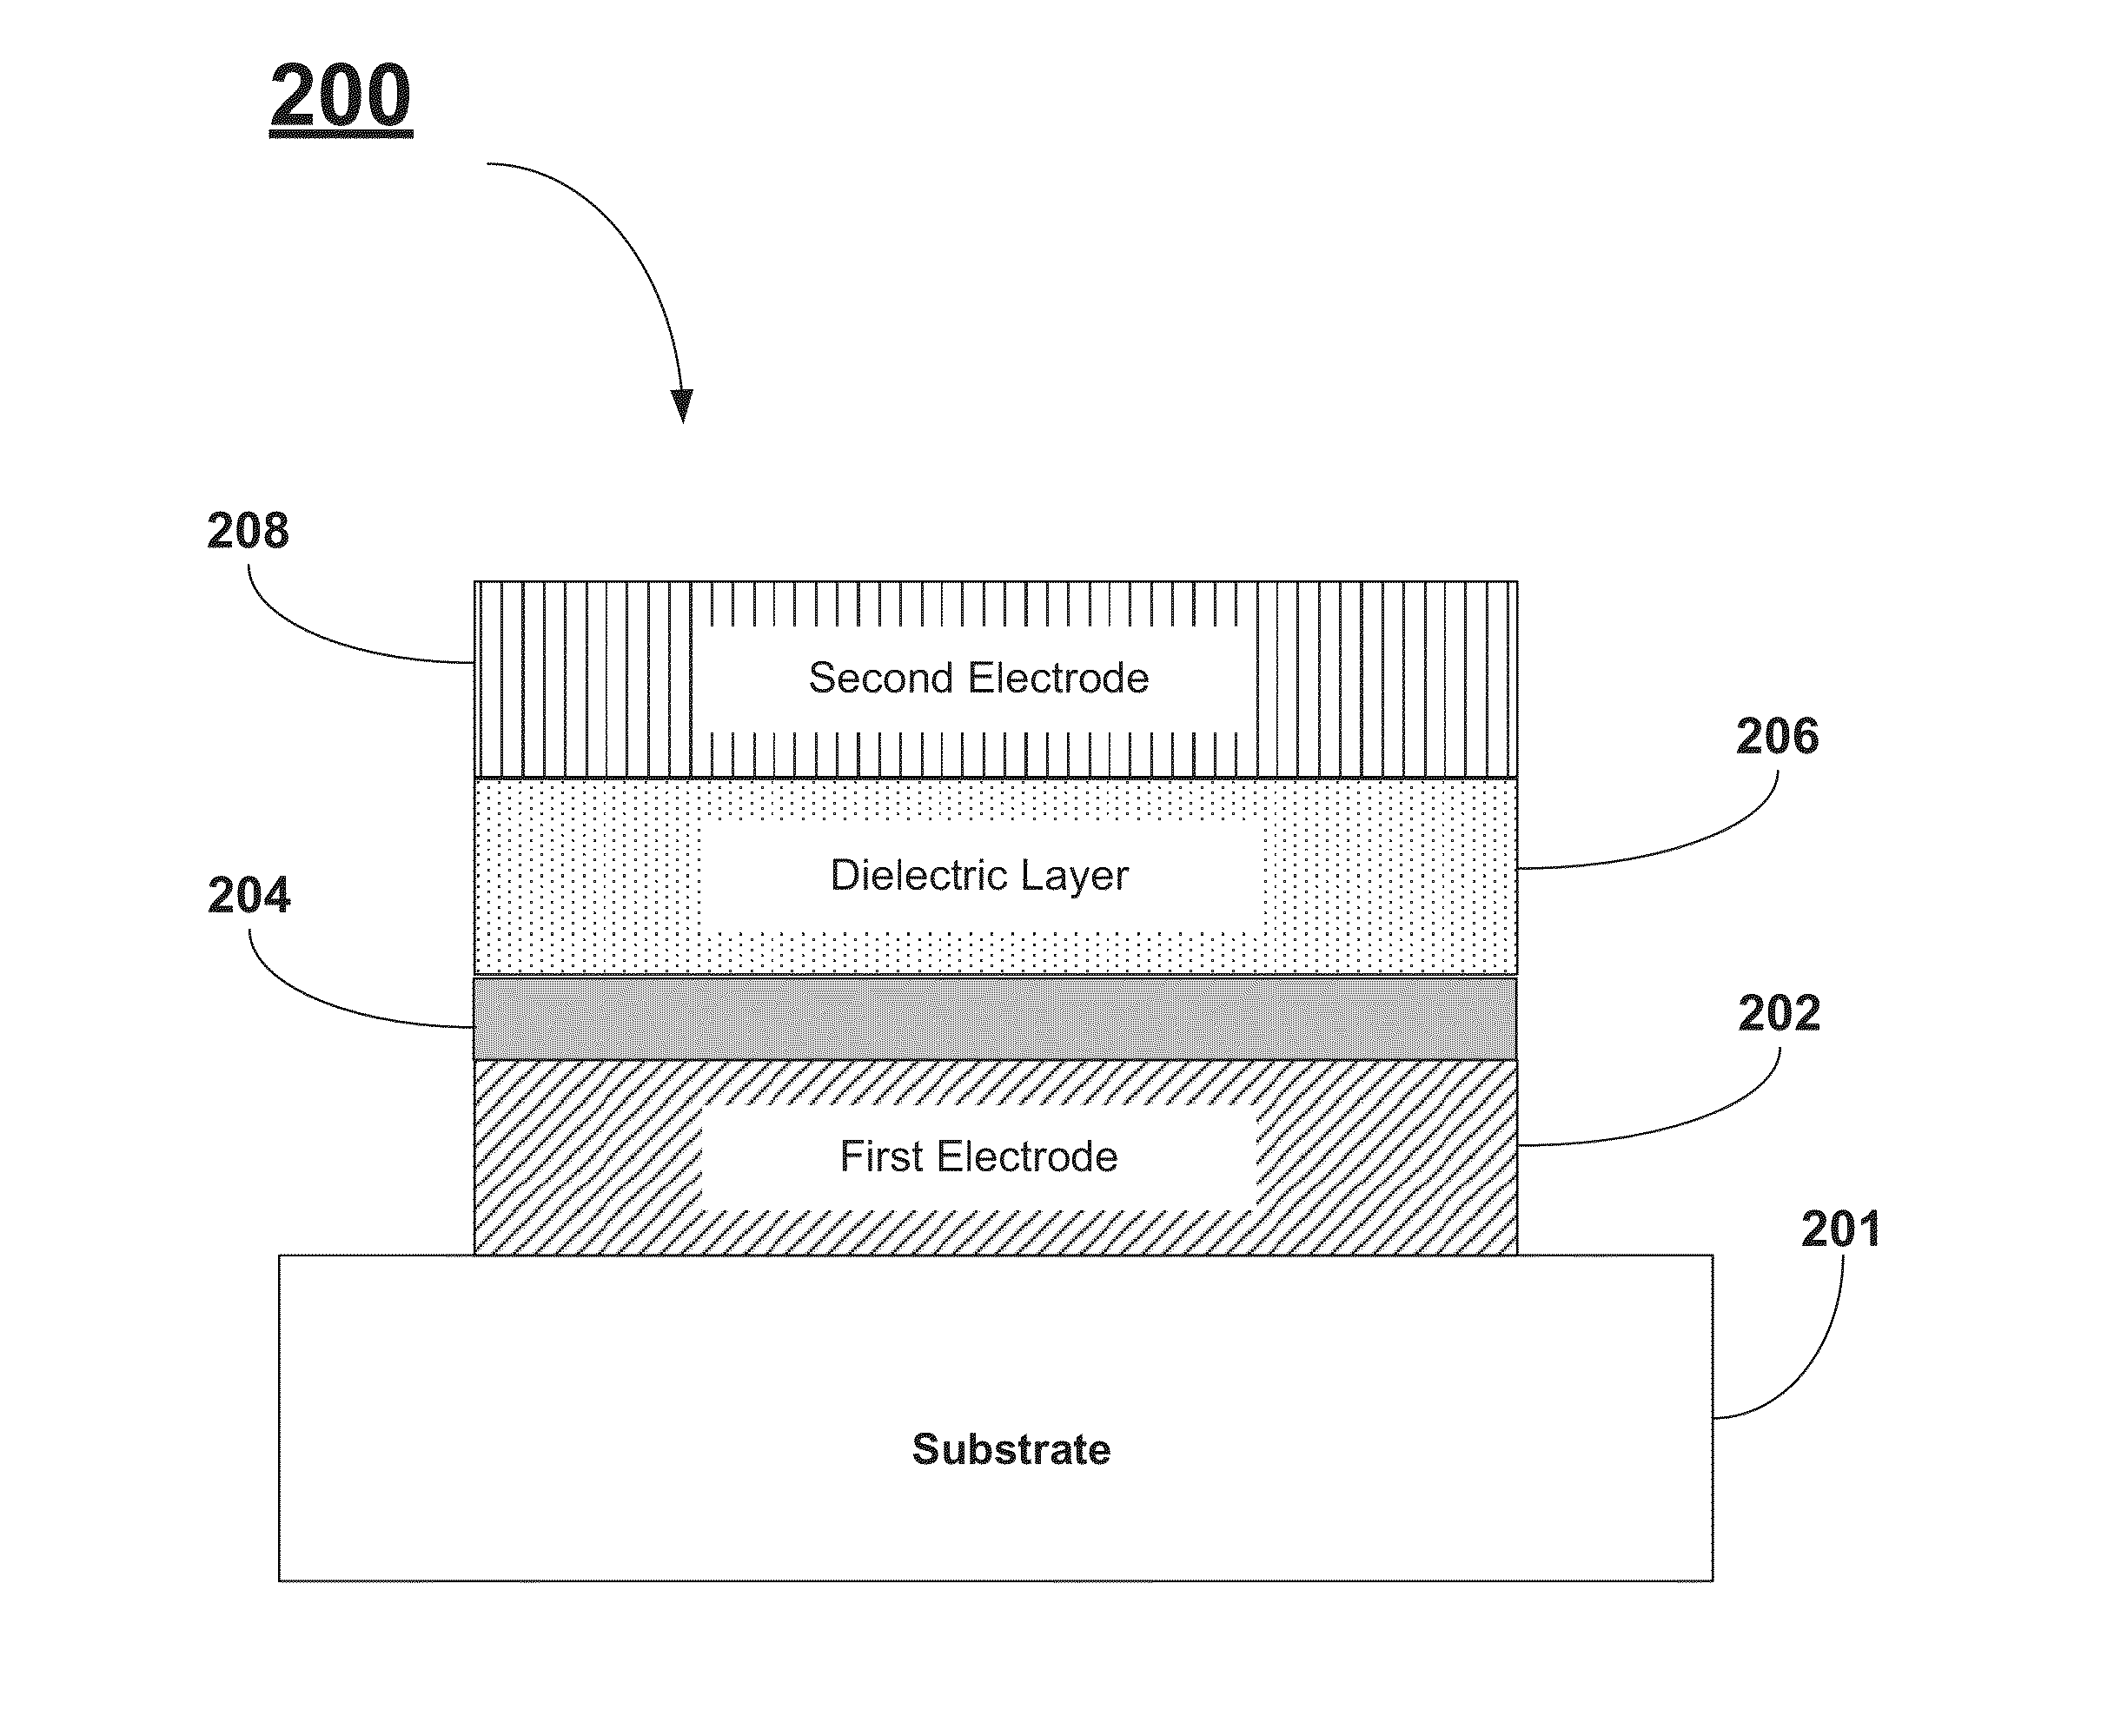 Methods for Reproducible Flash Layer Deposition